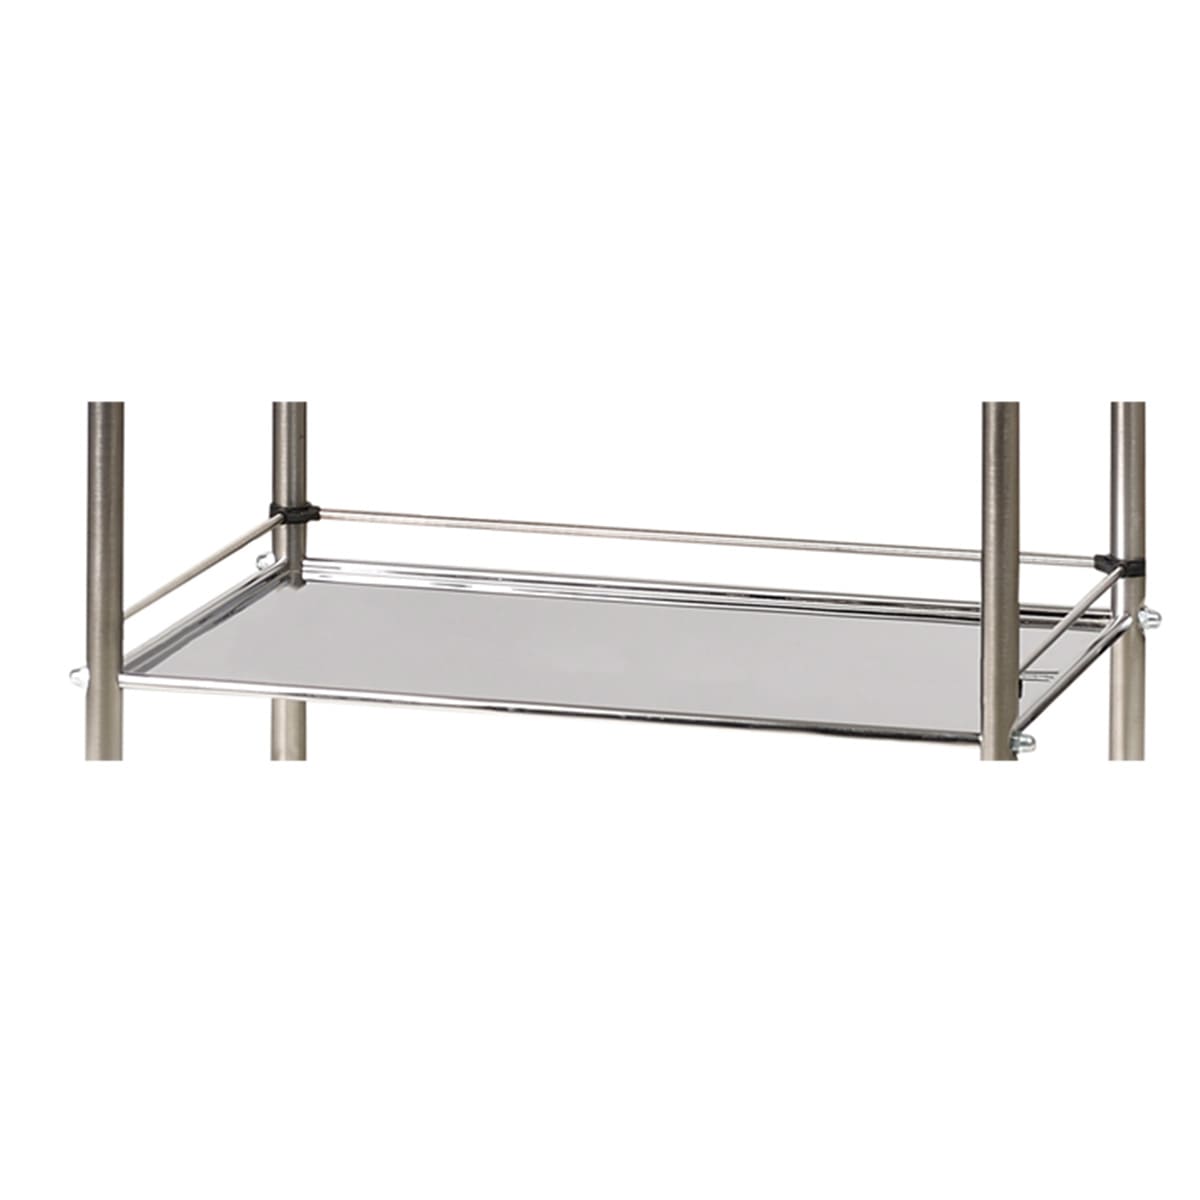 Set of 3 stainless steel guard rails for tray 60x40cm